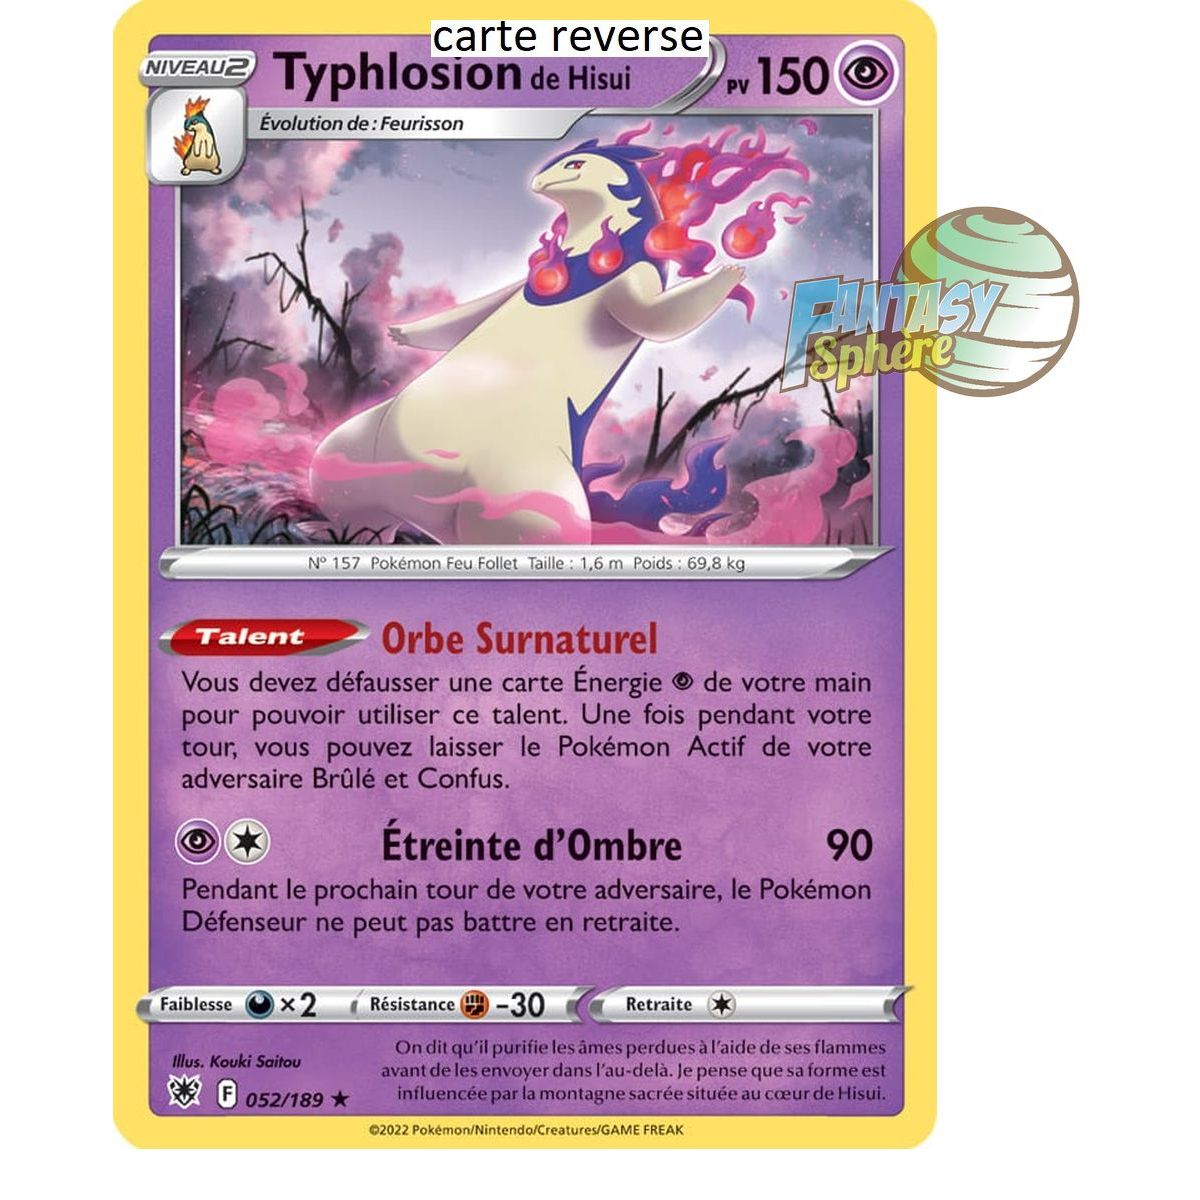 Typhlosion of Hisui - Reverse 52/189 - Sword and Shield 10 Radiant Stars